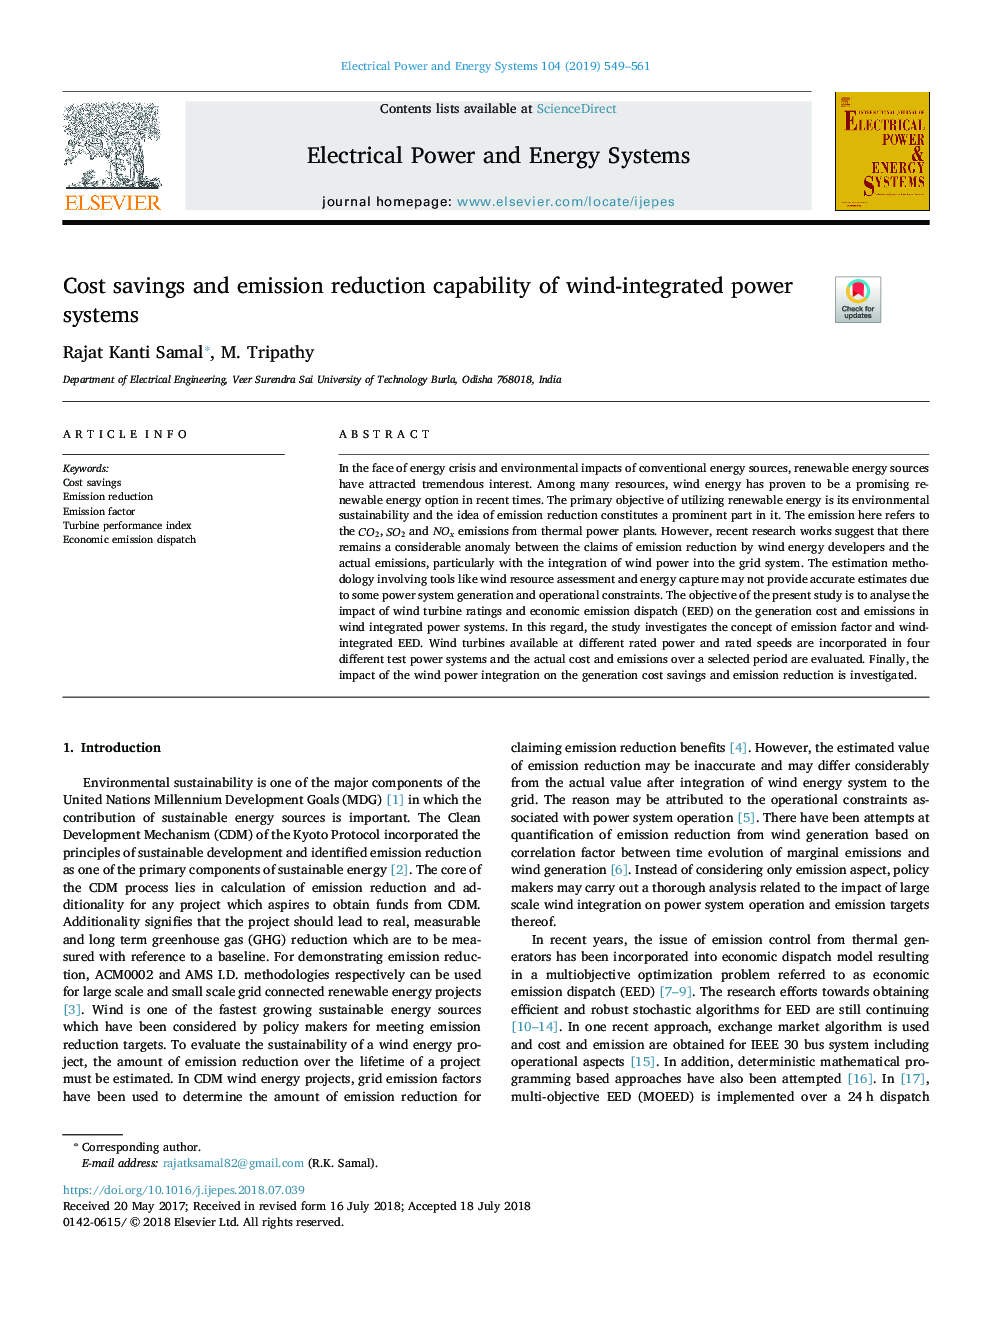 Cost savings and emission reduction capability of wind-integrated power systems